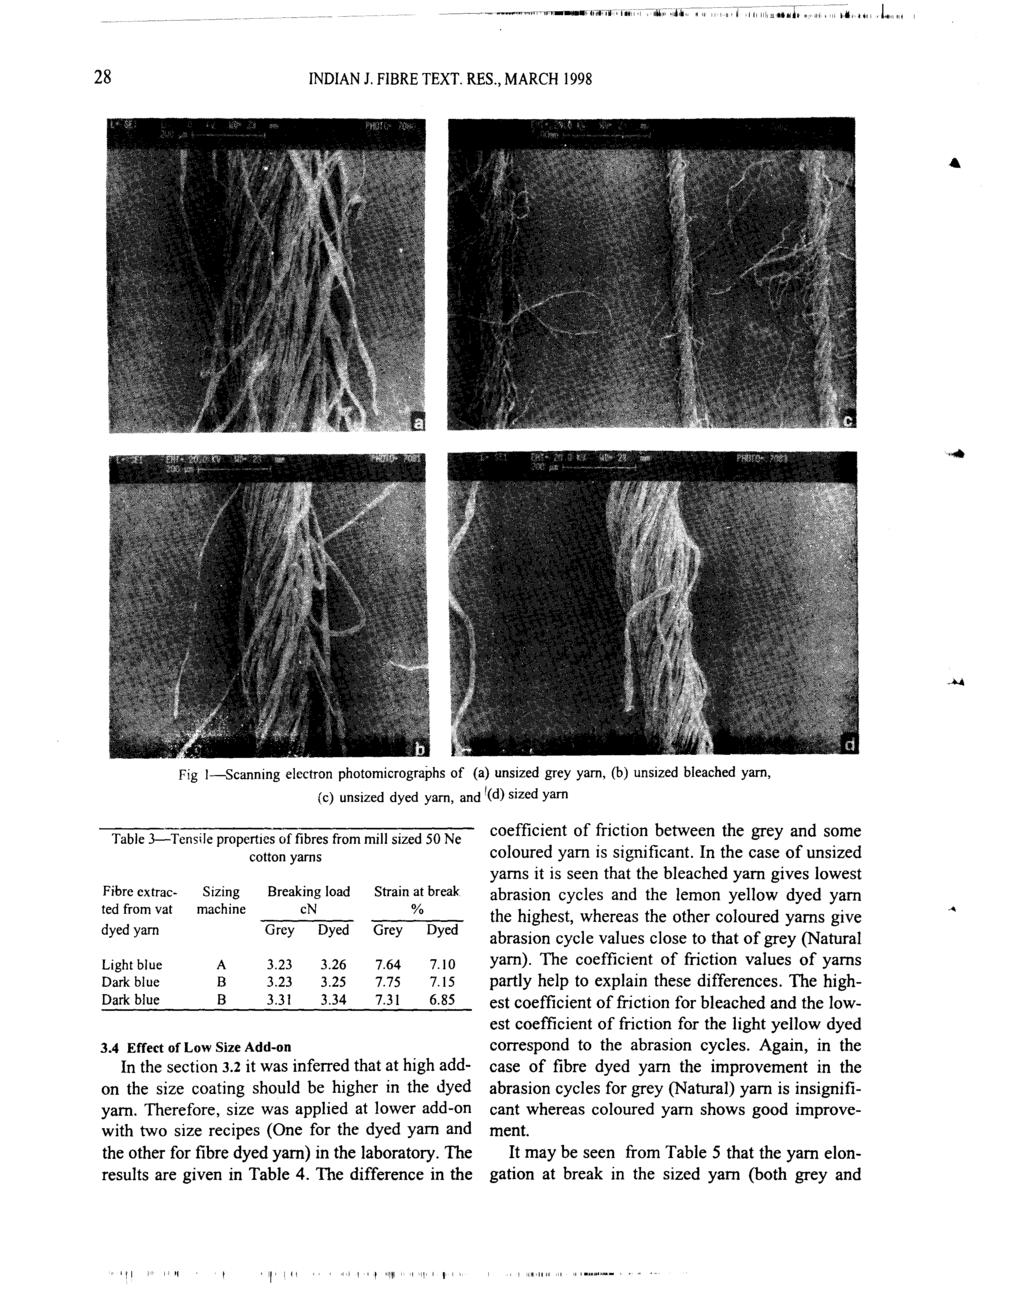 28 INDIAN J. FIBRE TEXT. RES., MARCH] 998 Fig I-Scanning electron photomicrographs of (a) unsized grey yam, (b) unsized bleached yam, (c) un sized dyed yam, and I(d) sized yam Table 3-3.23 3.